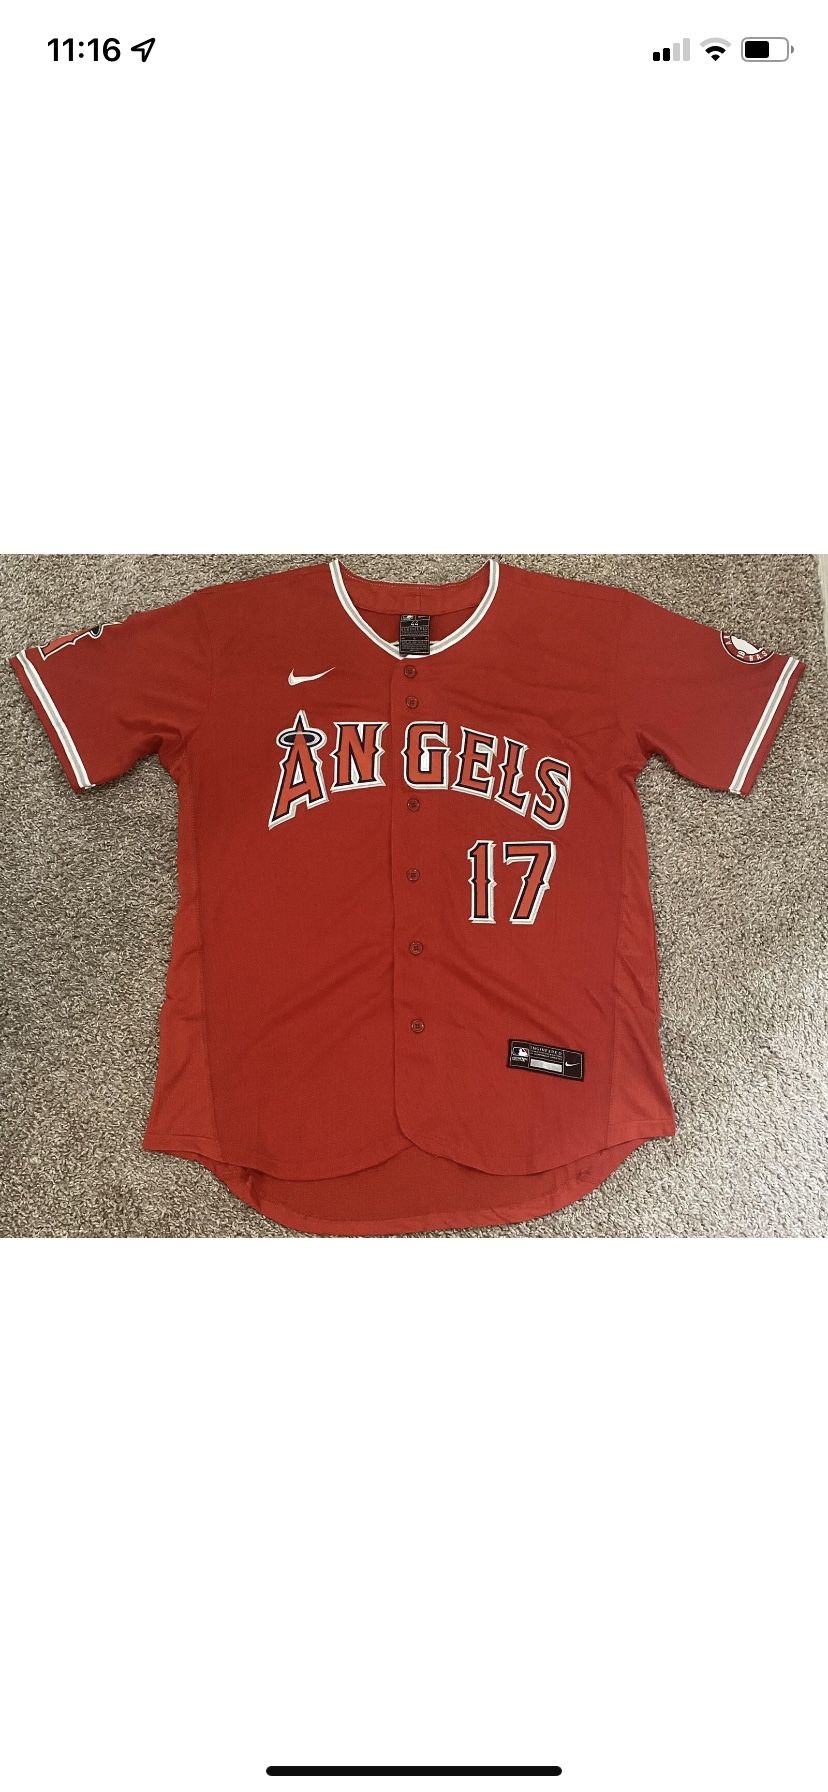 Los Angeles Angels Shohei Ohtani Red Jersey Adult Size Large BRAND NEW